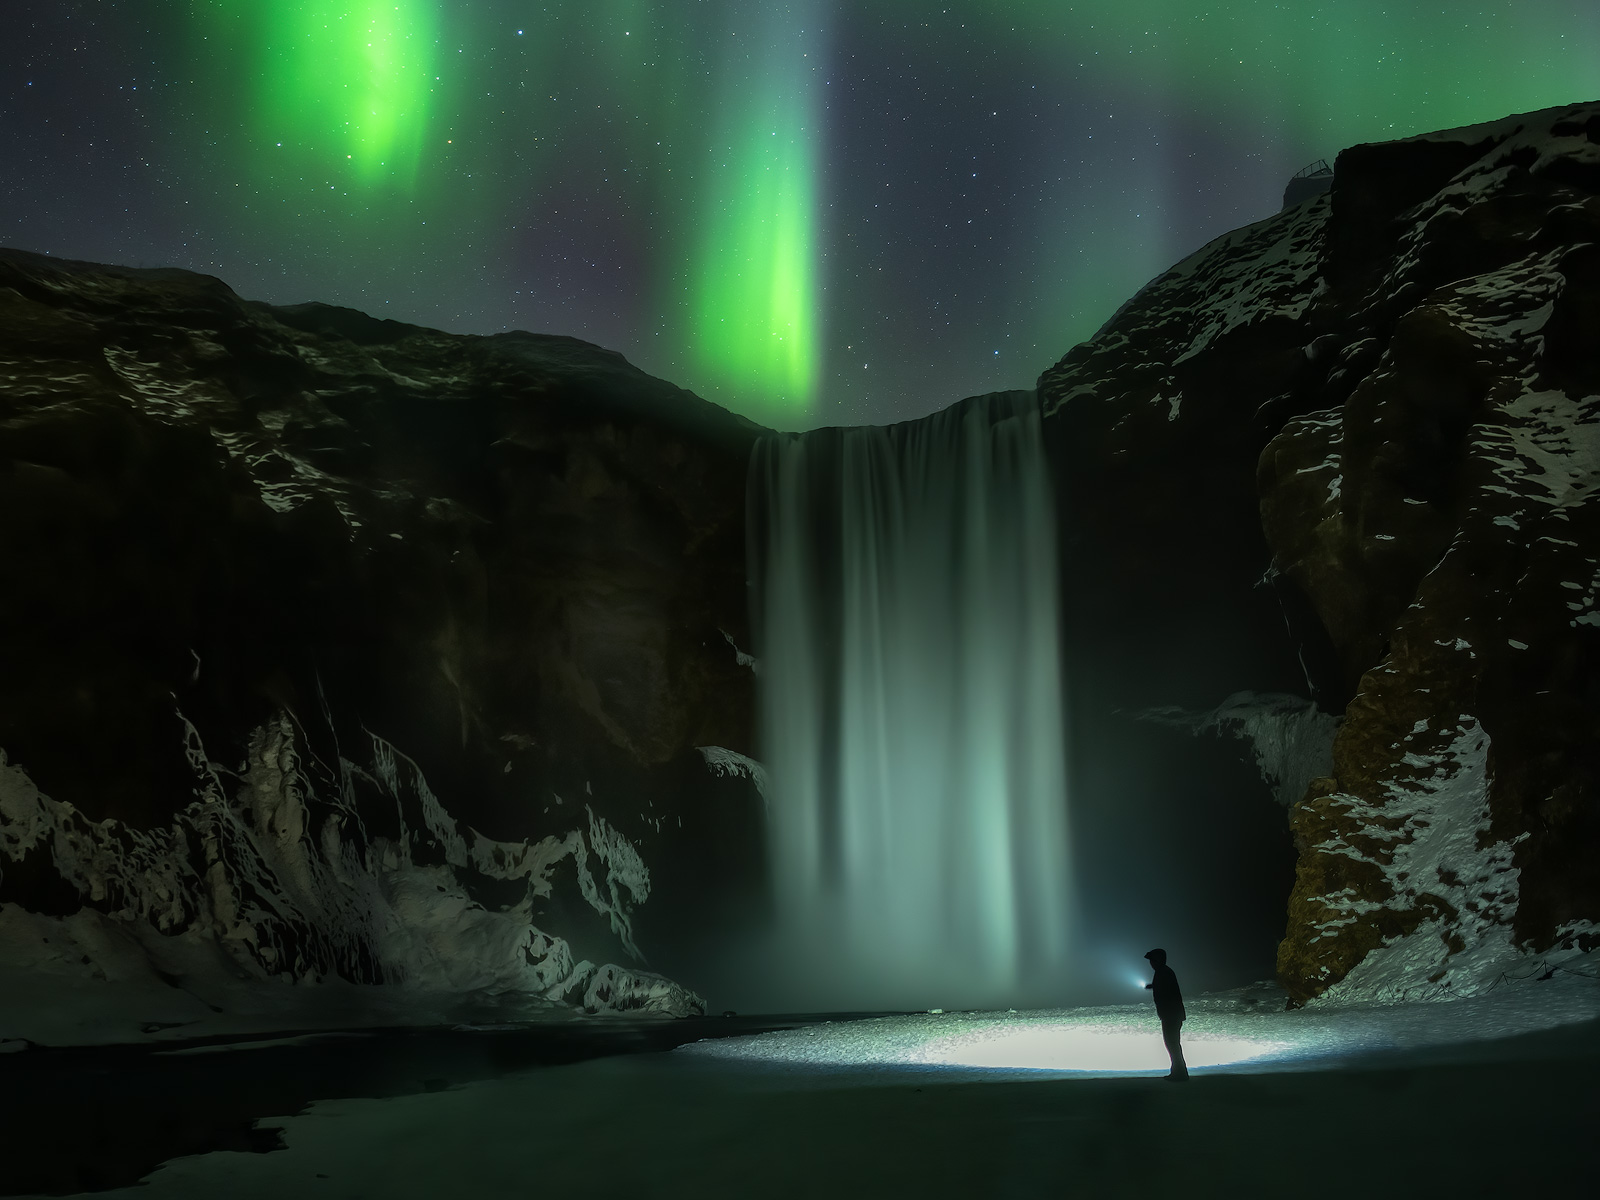 One of Iceland's amazing waterfalls with a northern lights display above.